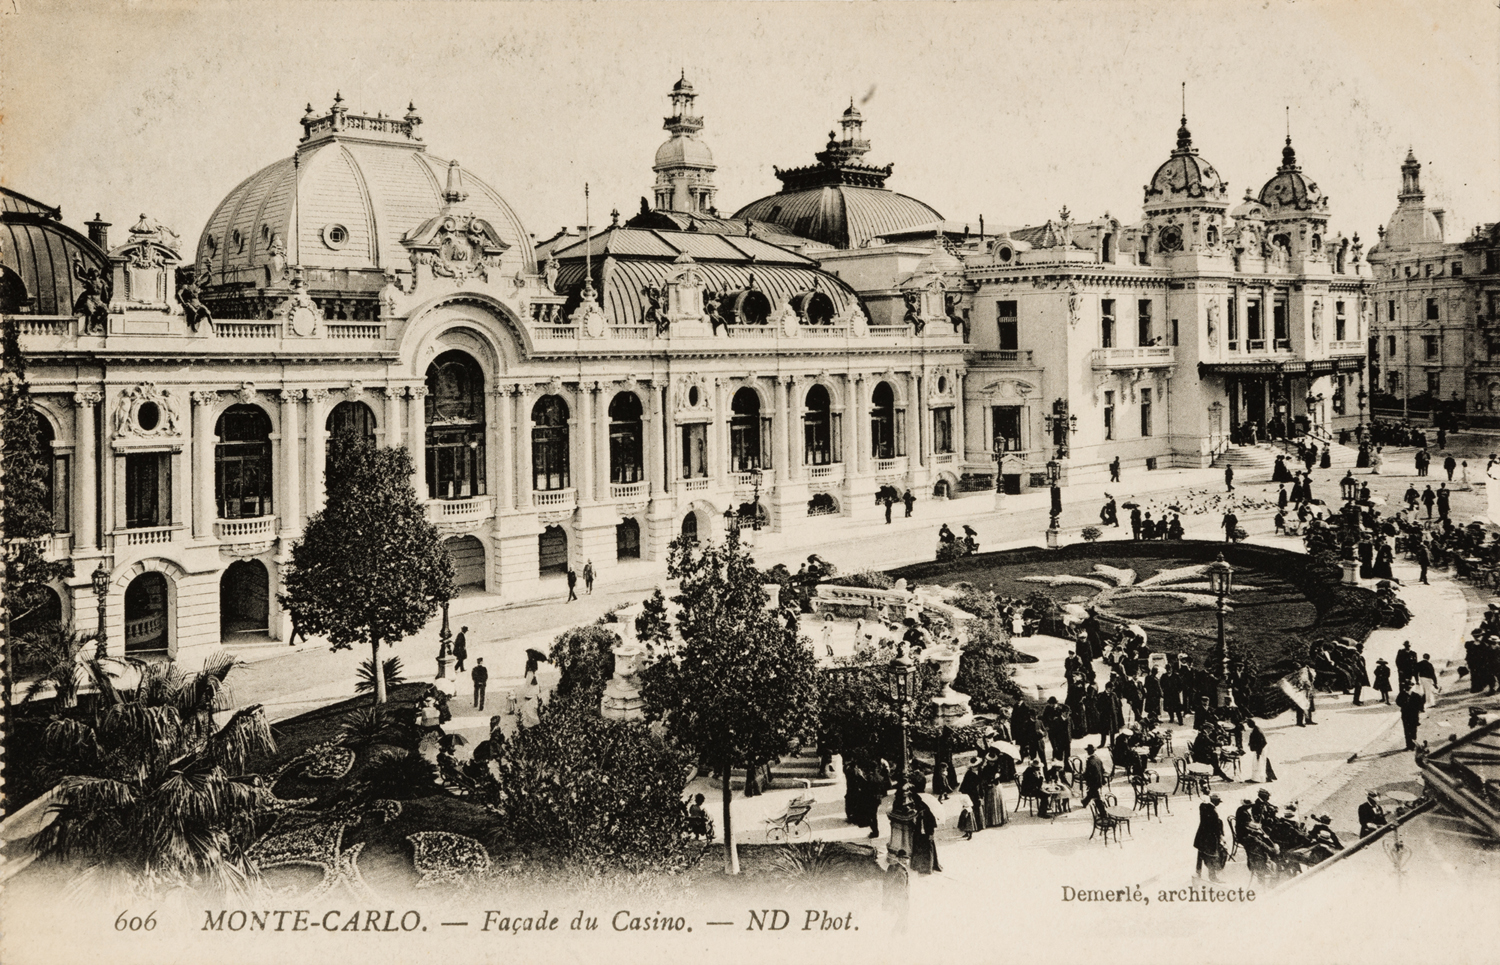 Vintage Pointe » “Home and Rest”: A Ballet Lover's Guide to Monte Carlo